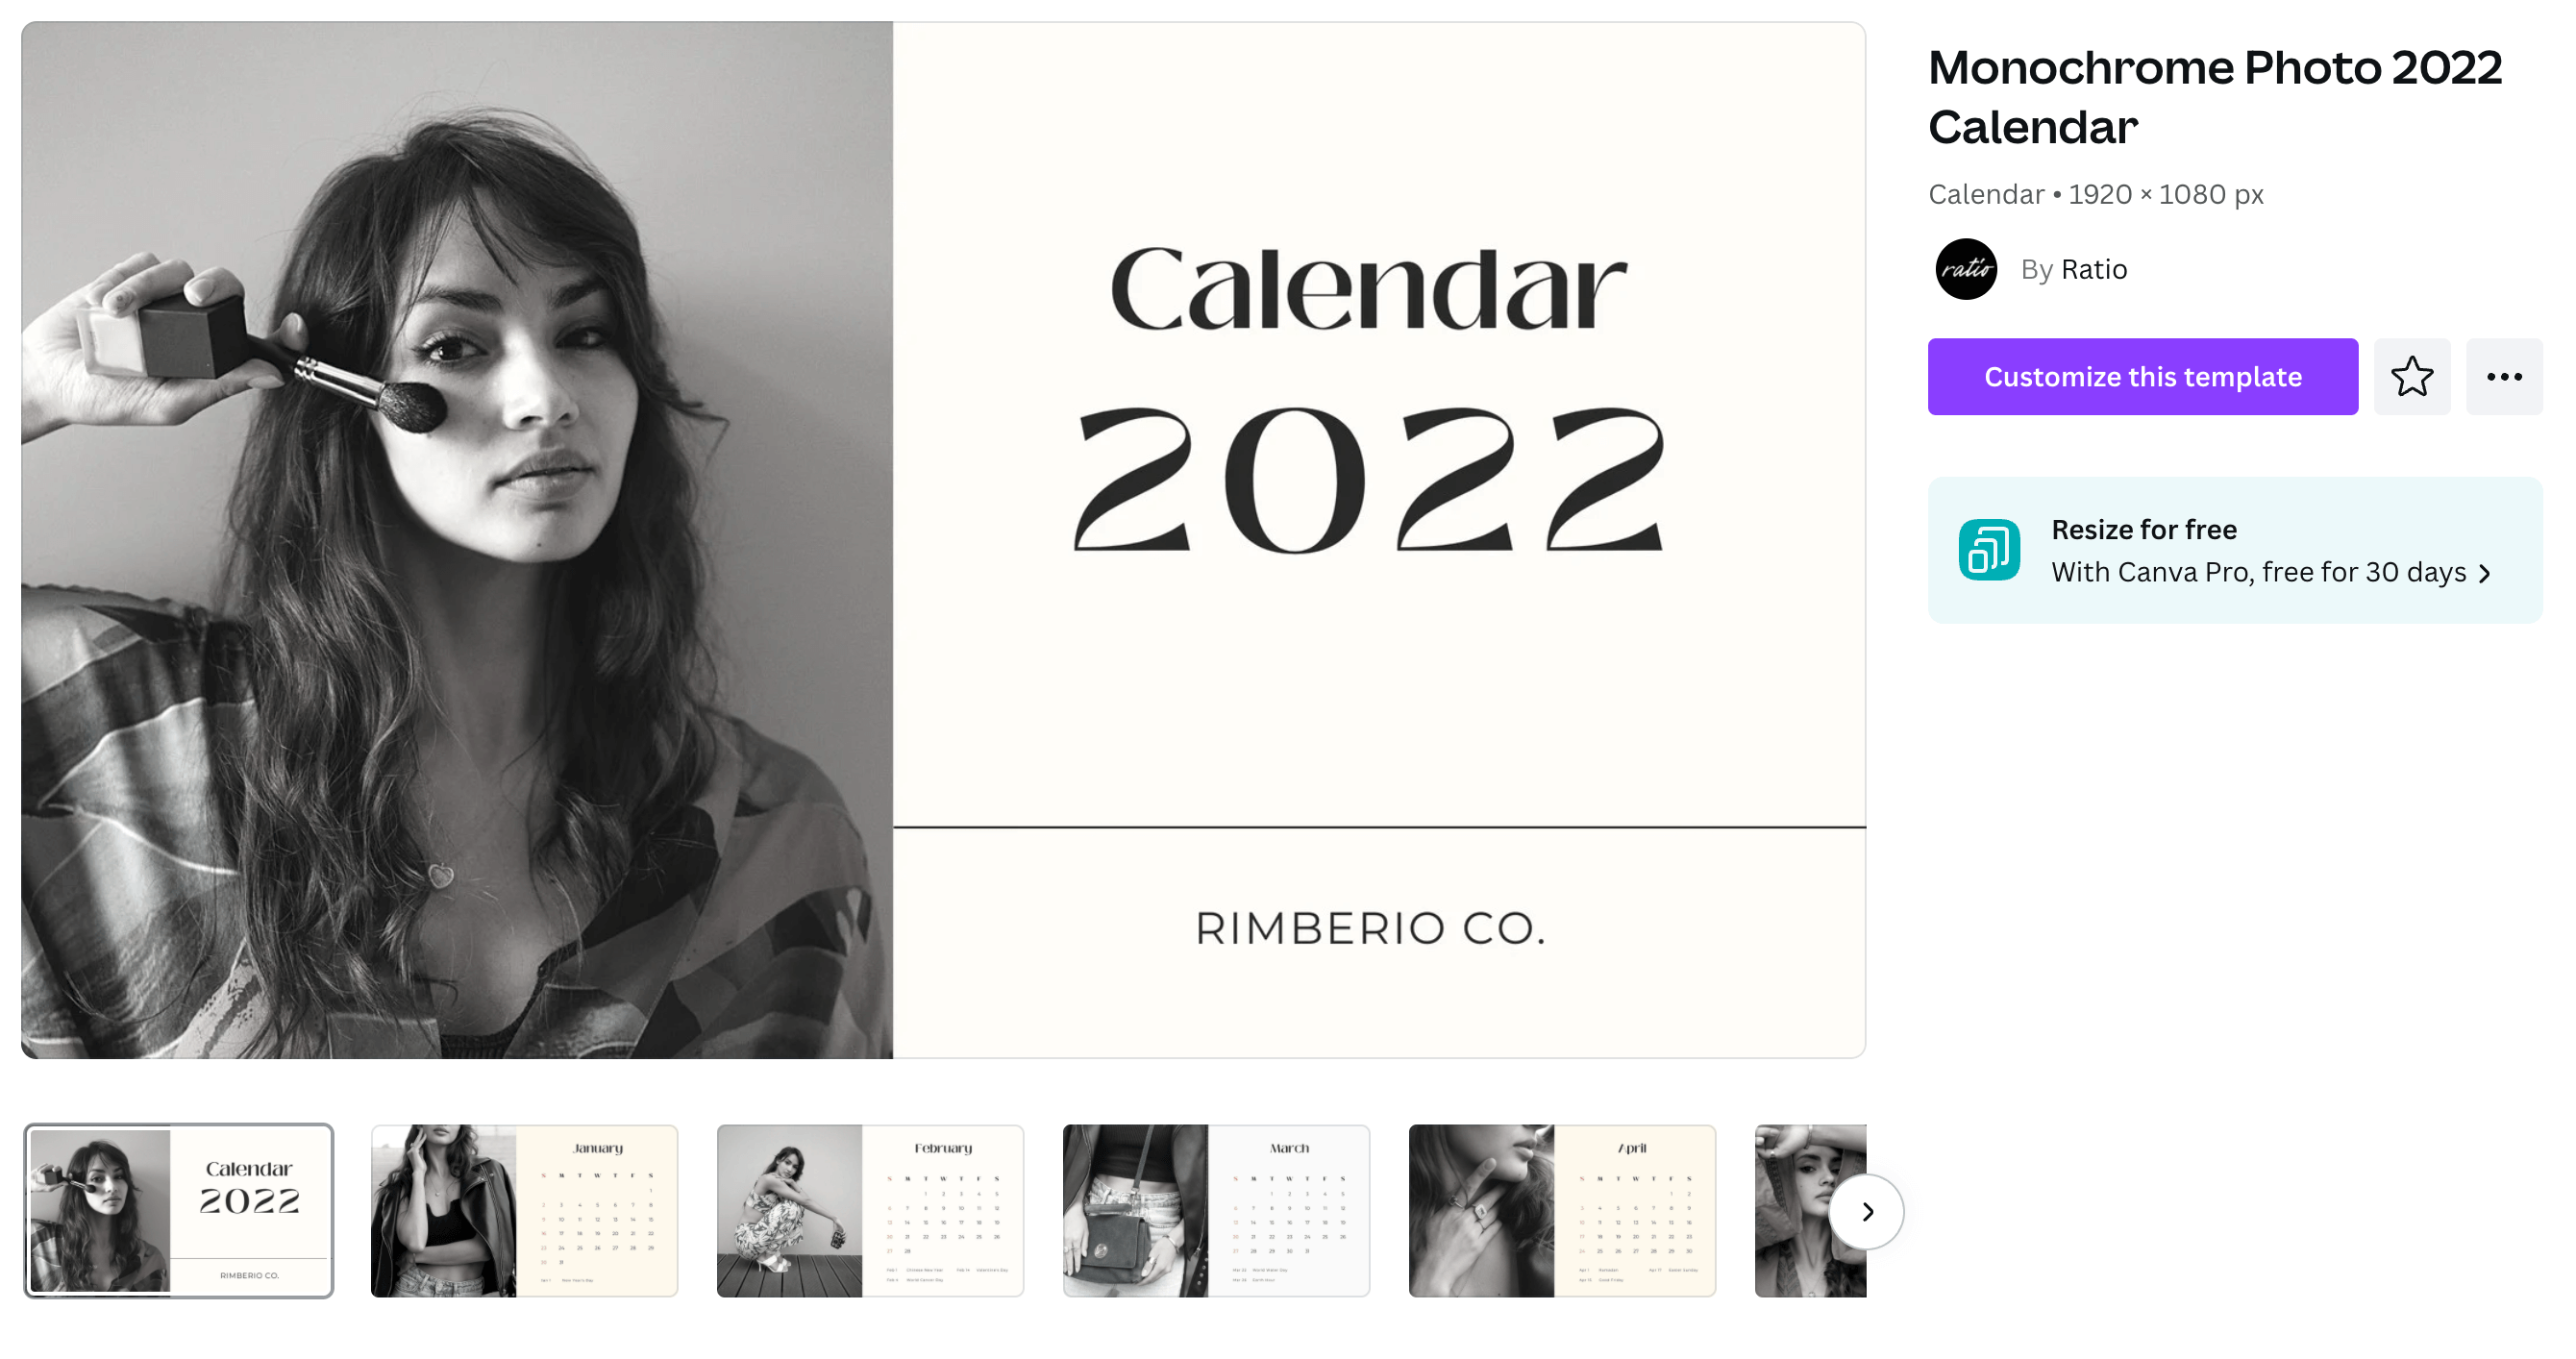 A calendar featuring black and white photos of models